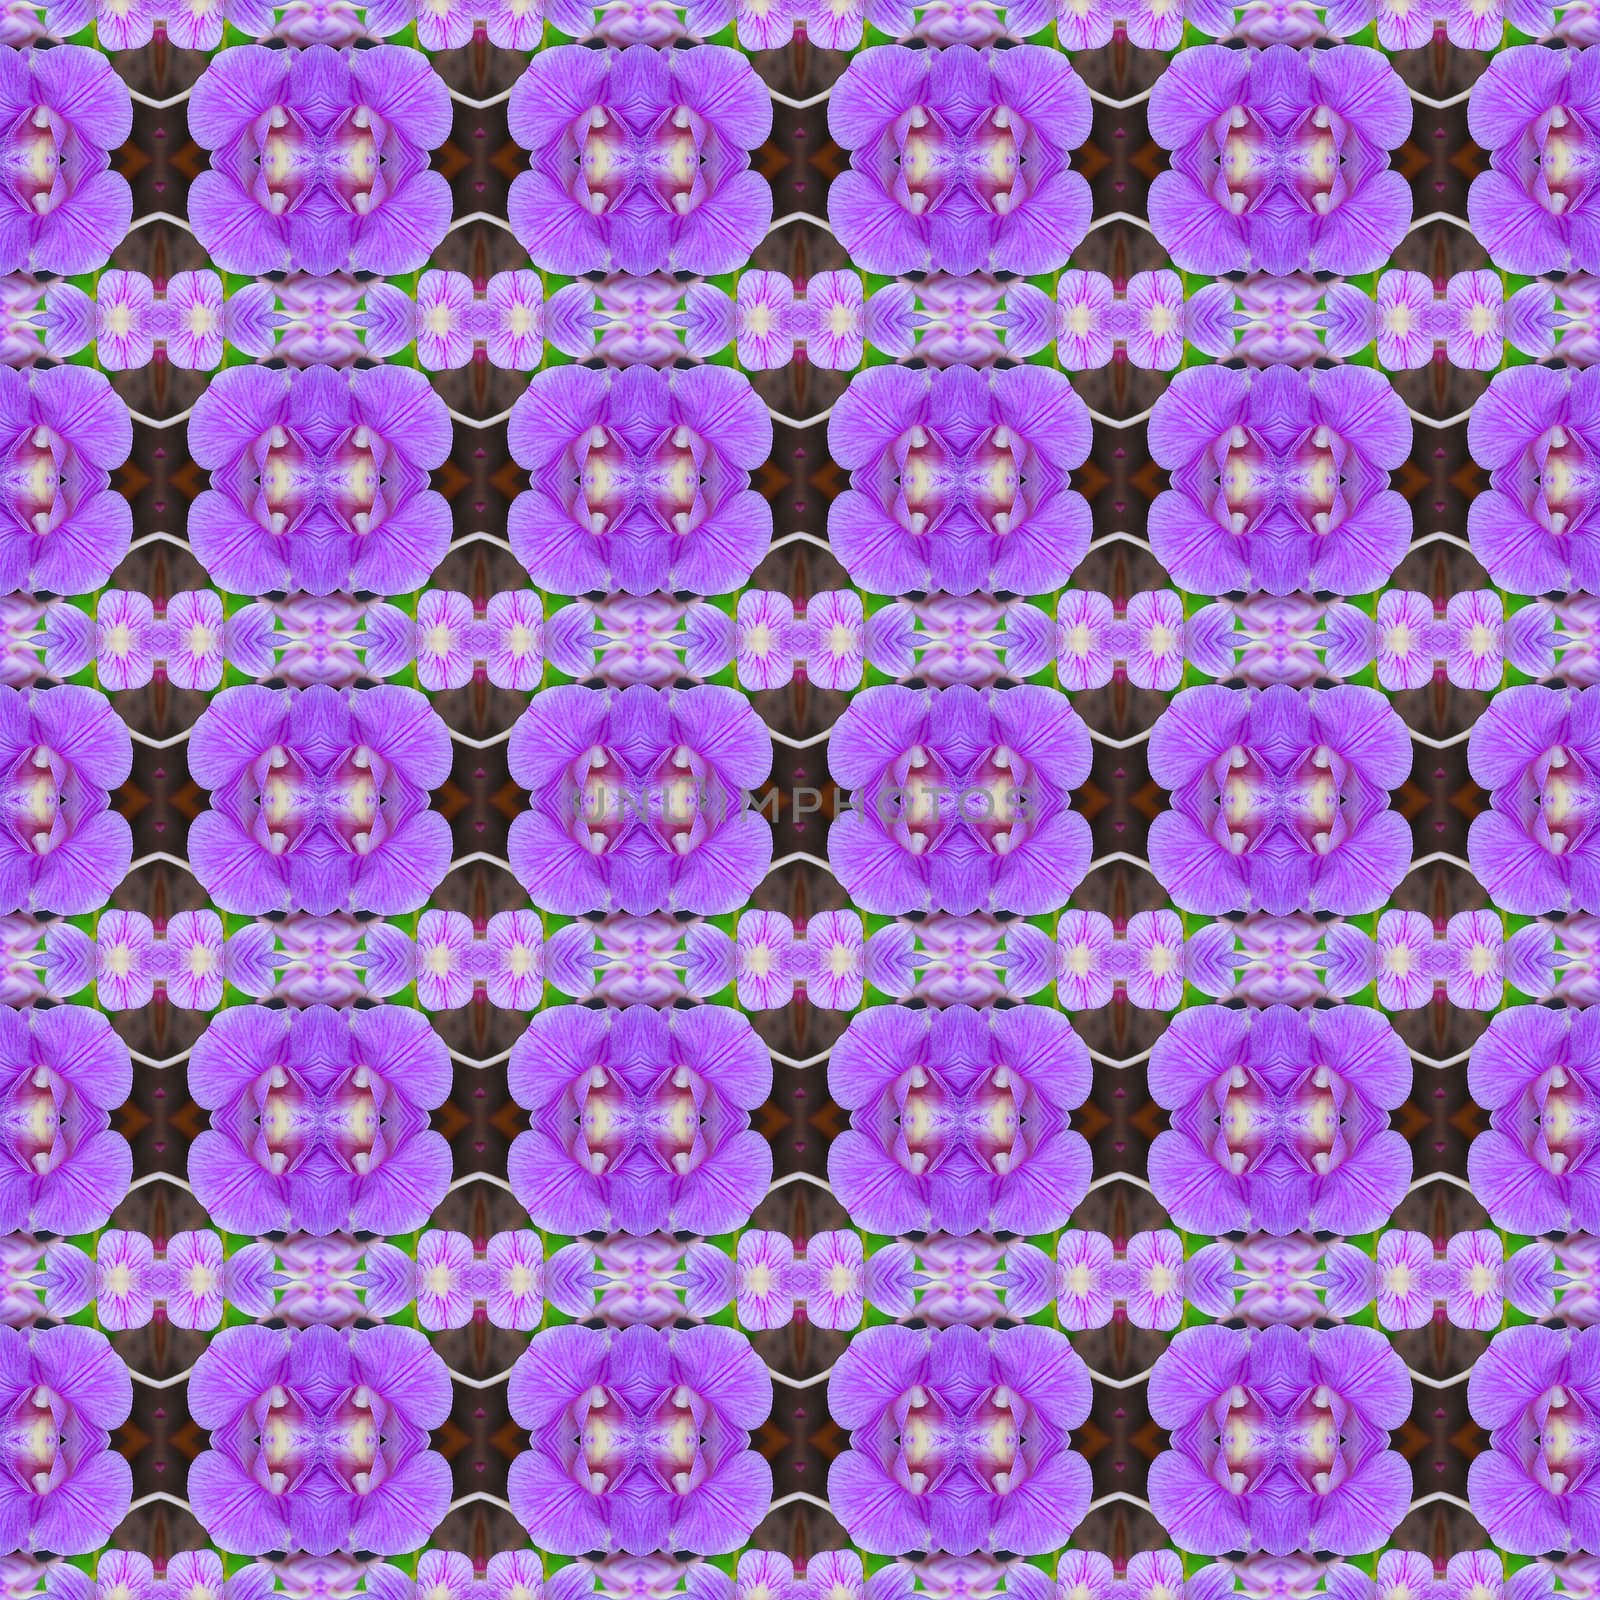 Purple orchids, a bouquet of flowers are in full bloom seamless use as pattern and wallpaper.